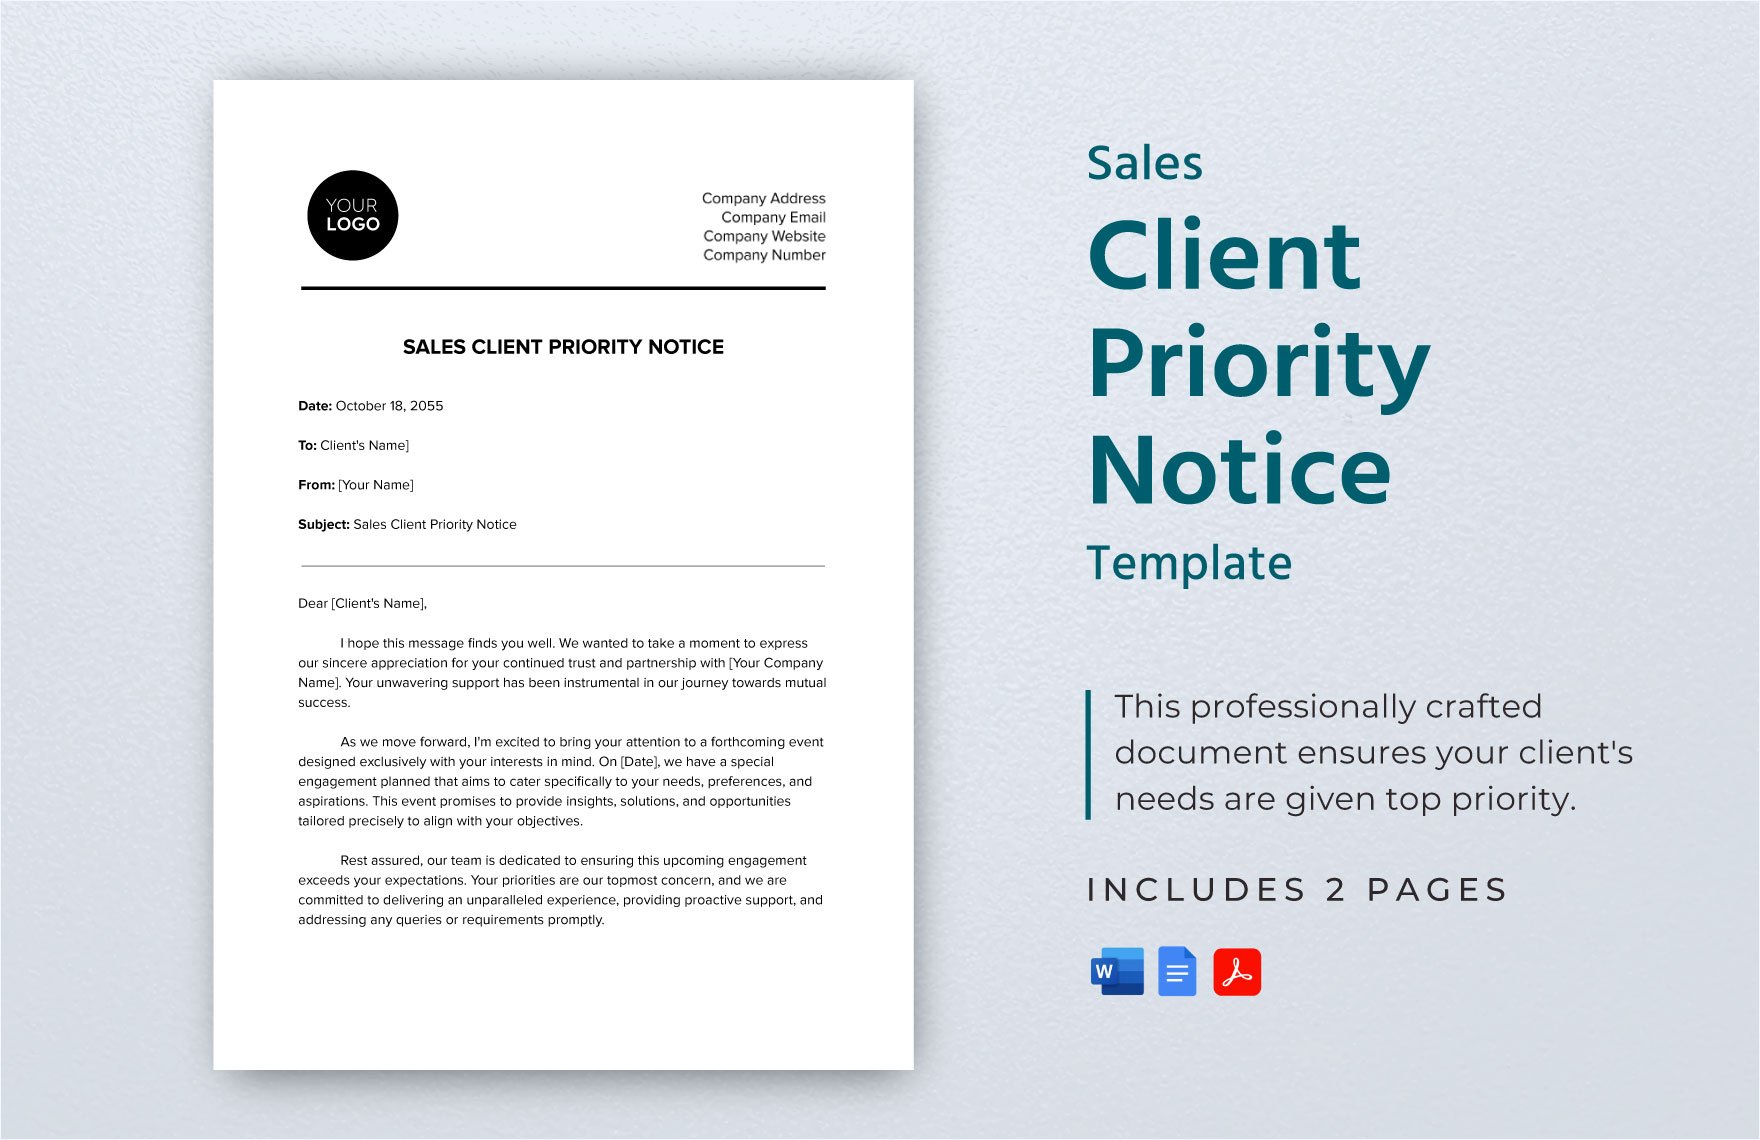 Sales Client Priority Notice Template